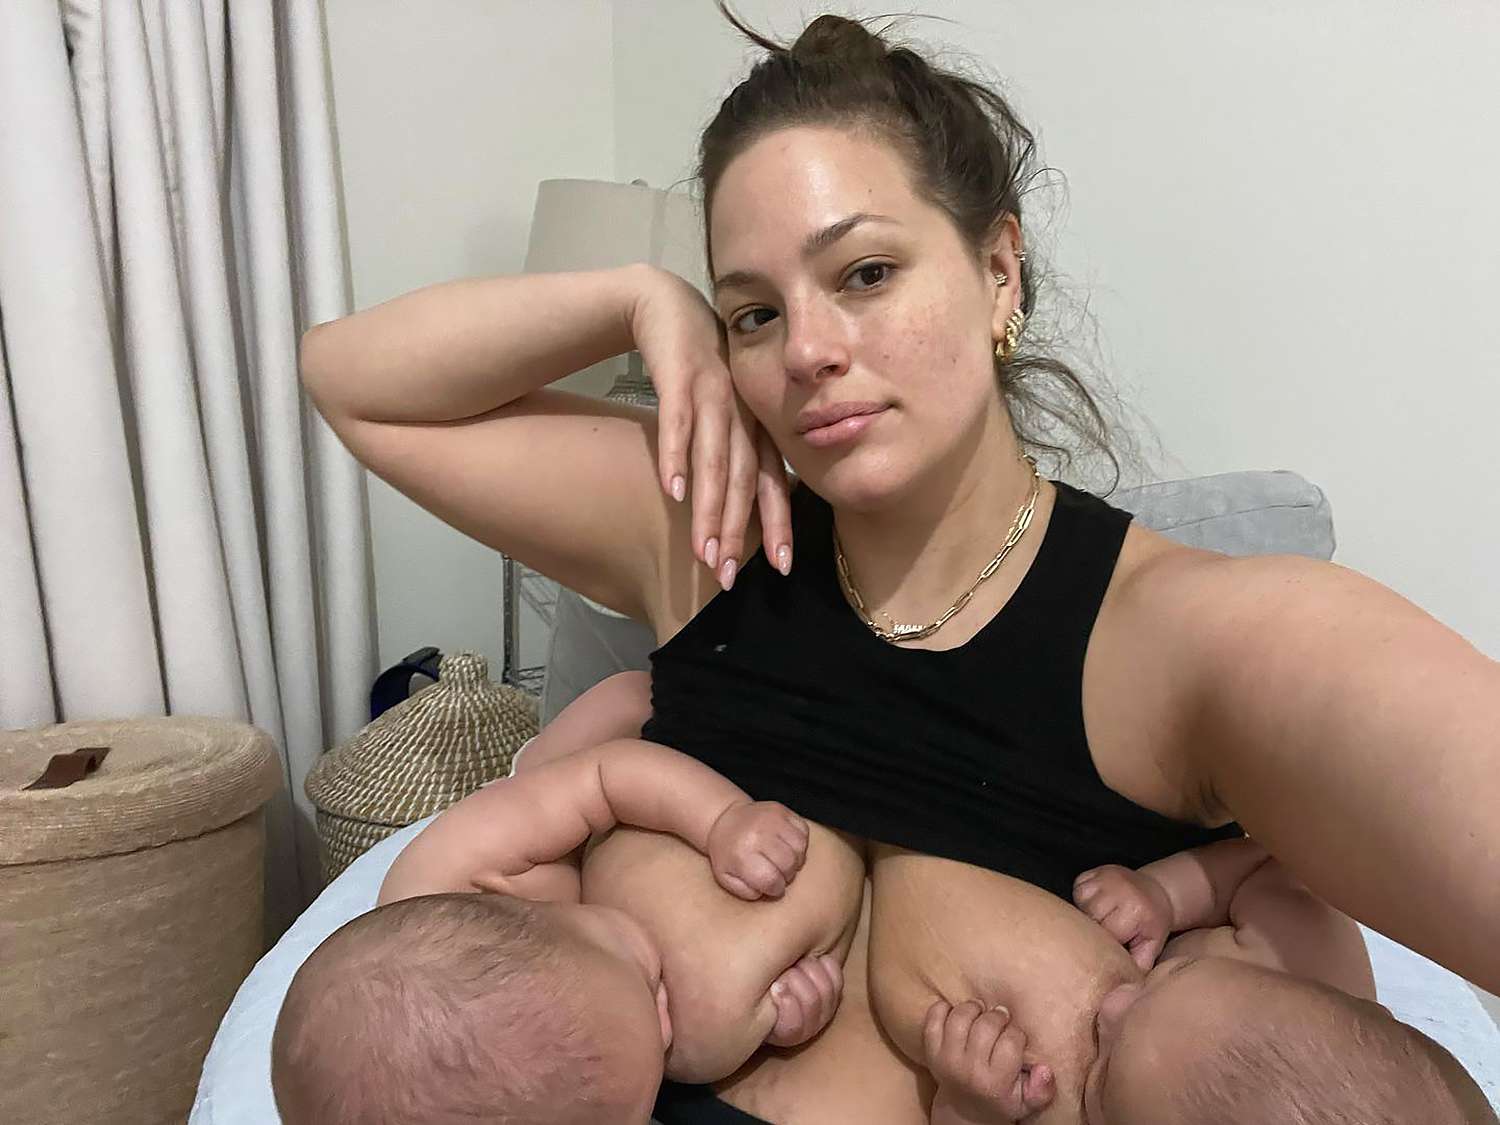 billy nacario recommends mom shows son boobs pic